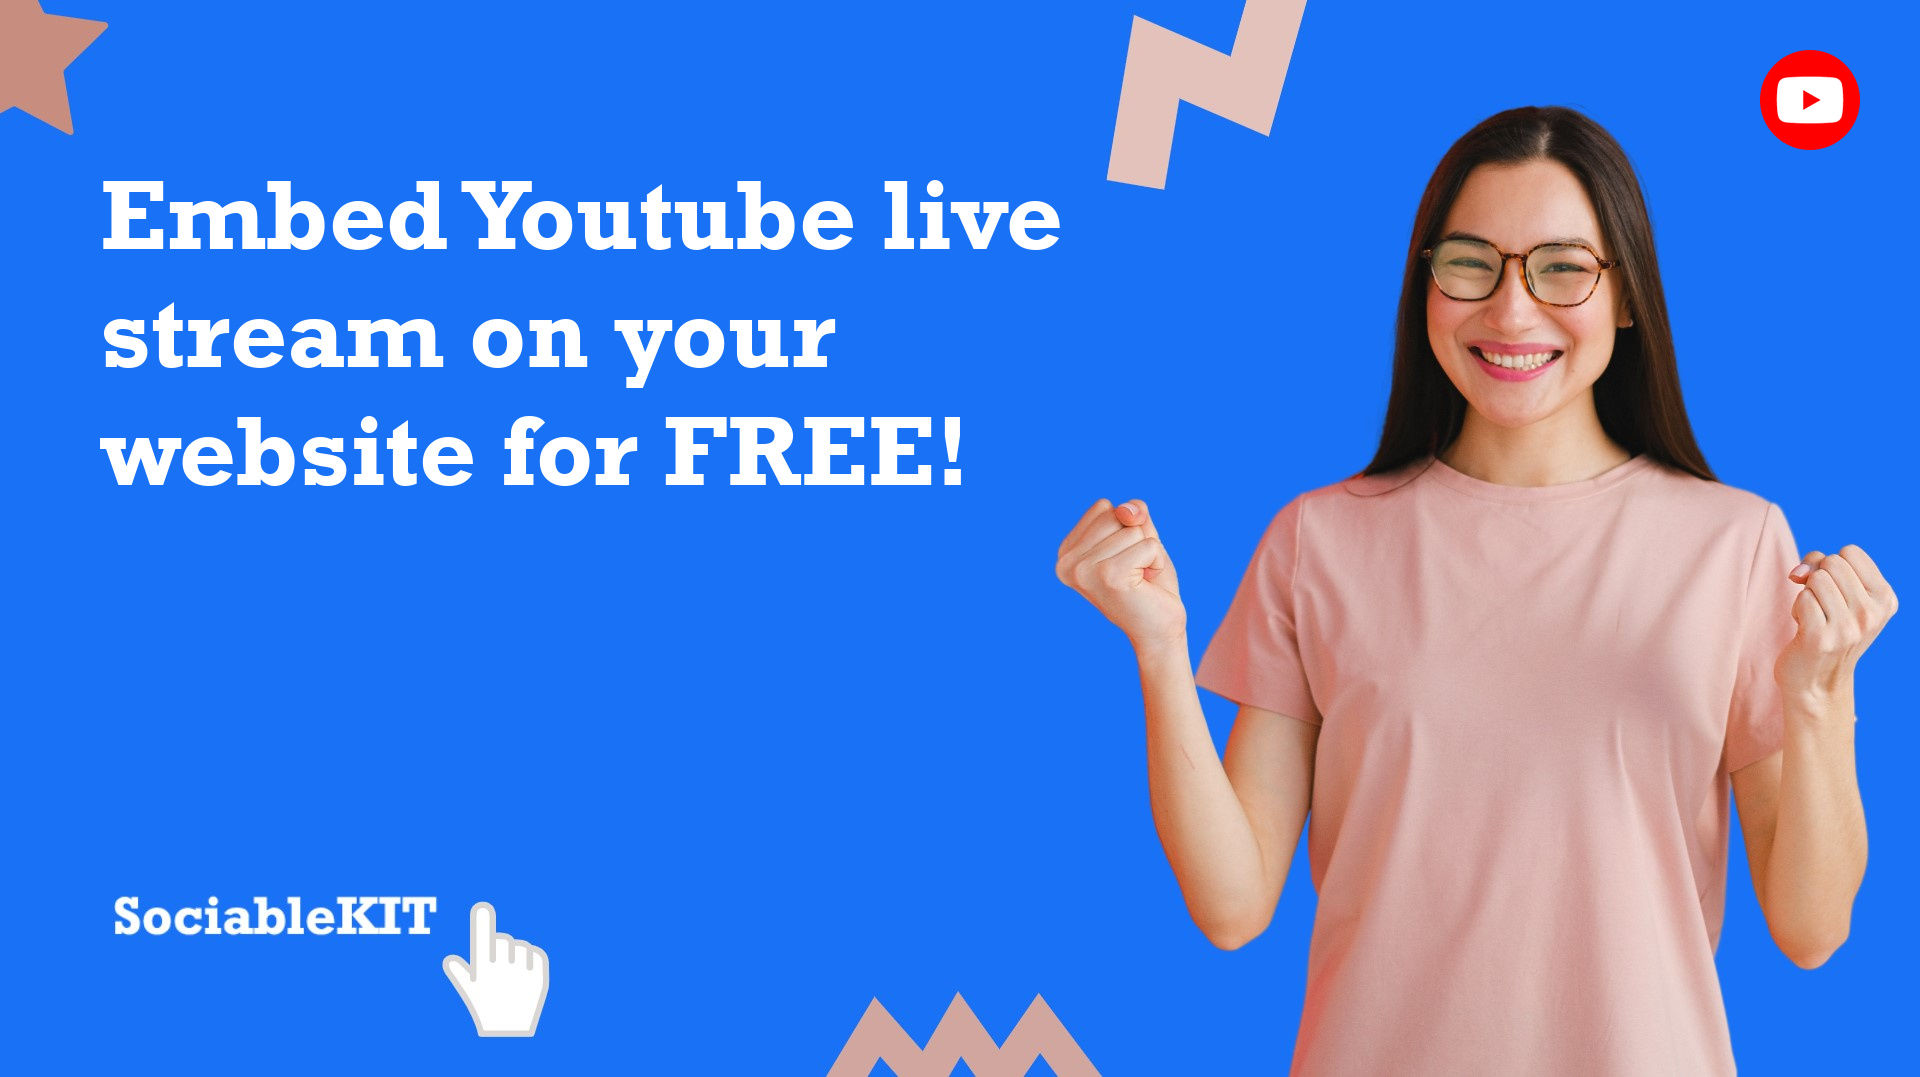 How to embed Youtube live stream on your website for FREE?